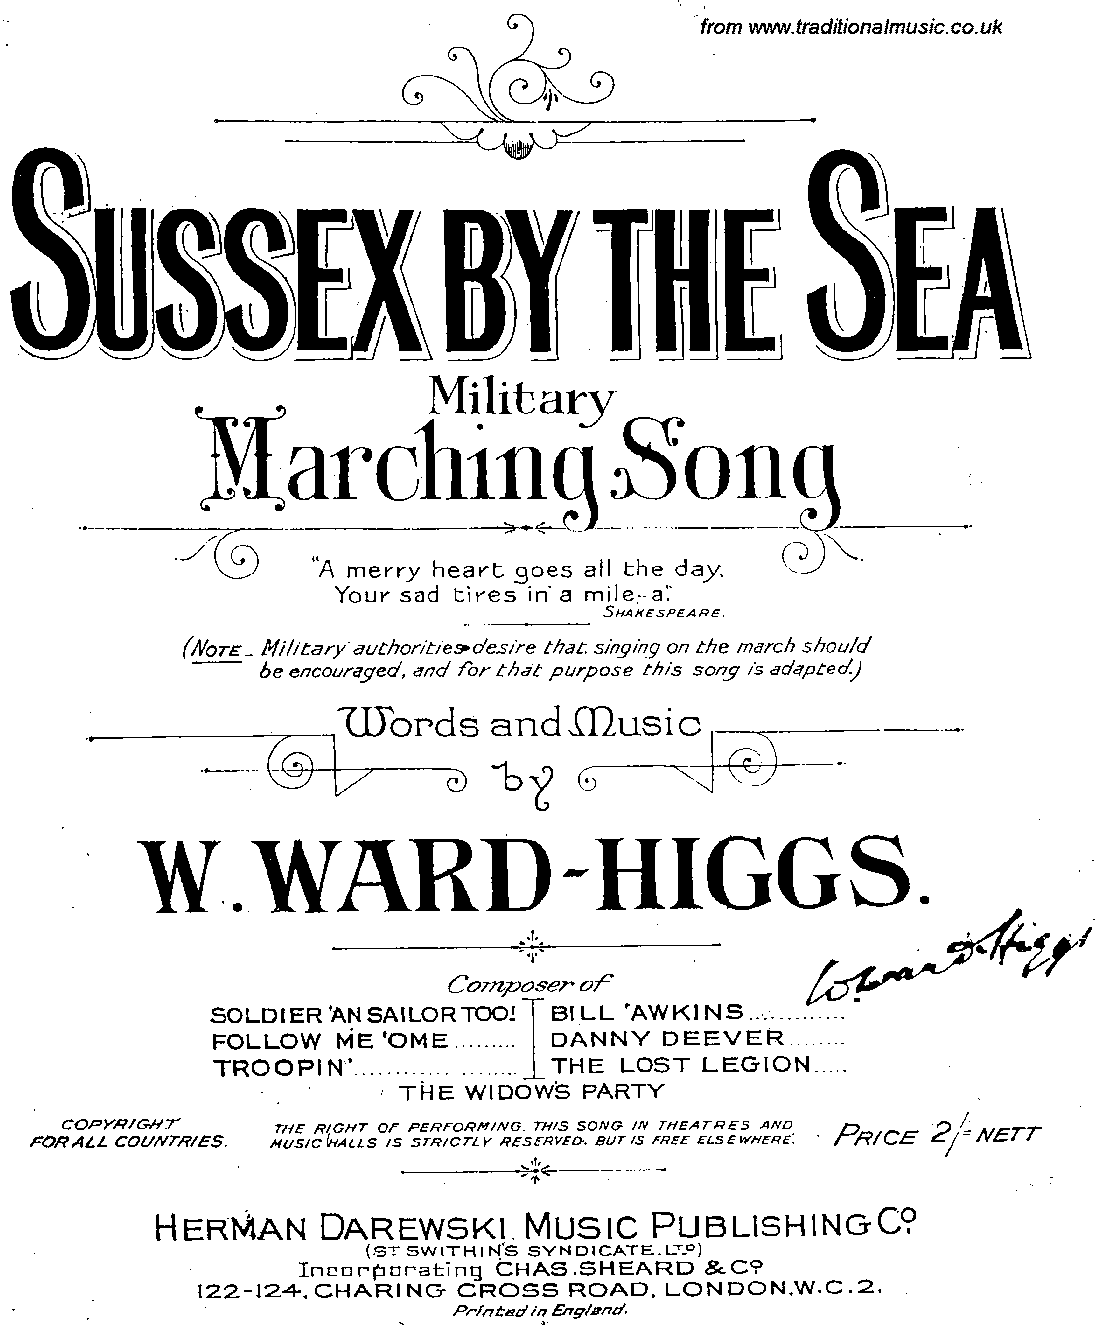 Sussex By The Sea, Complete Score, page 1 of 11